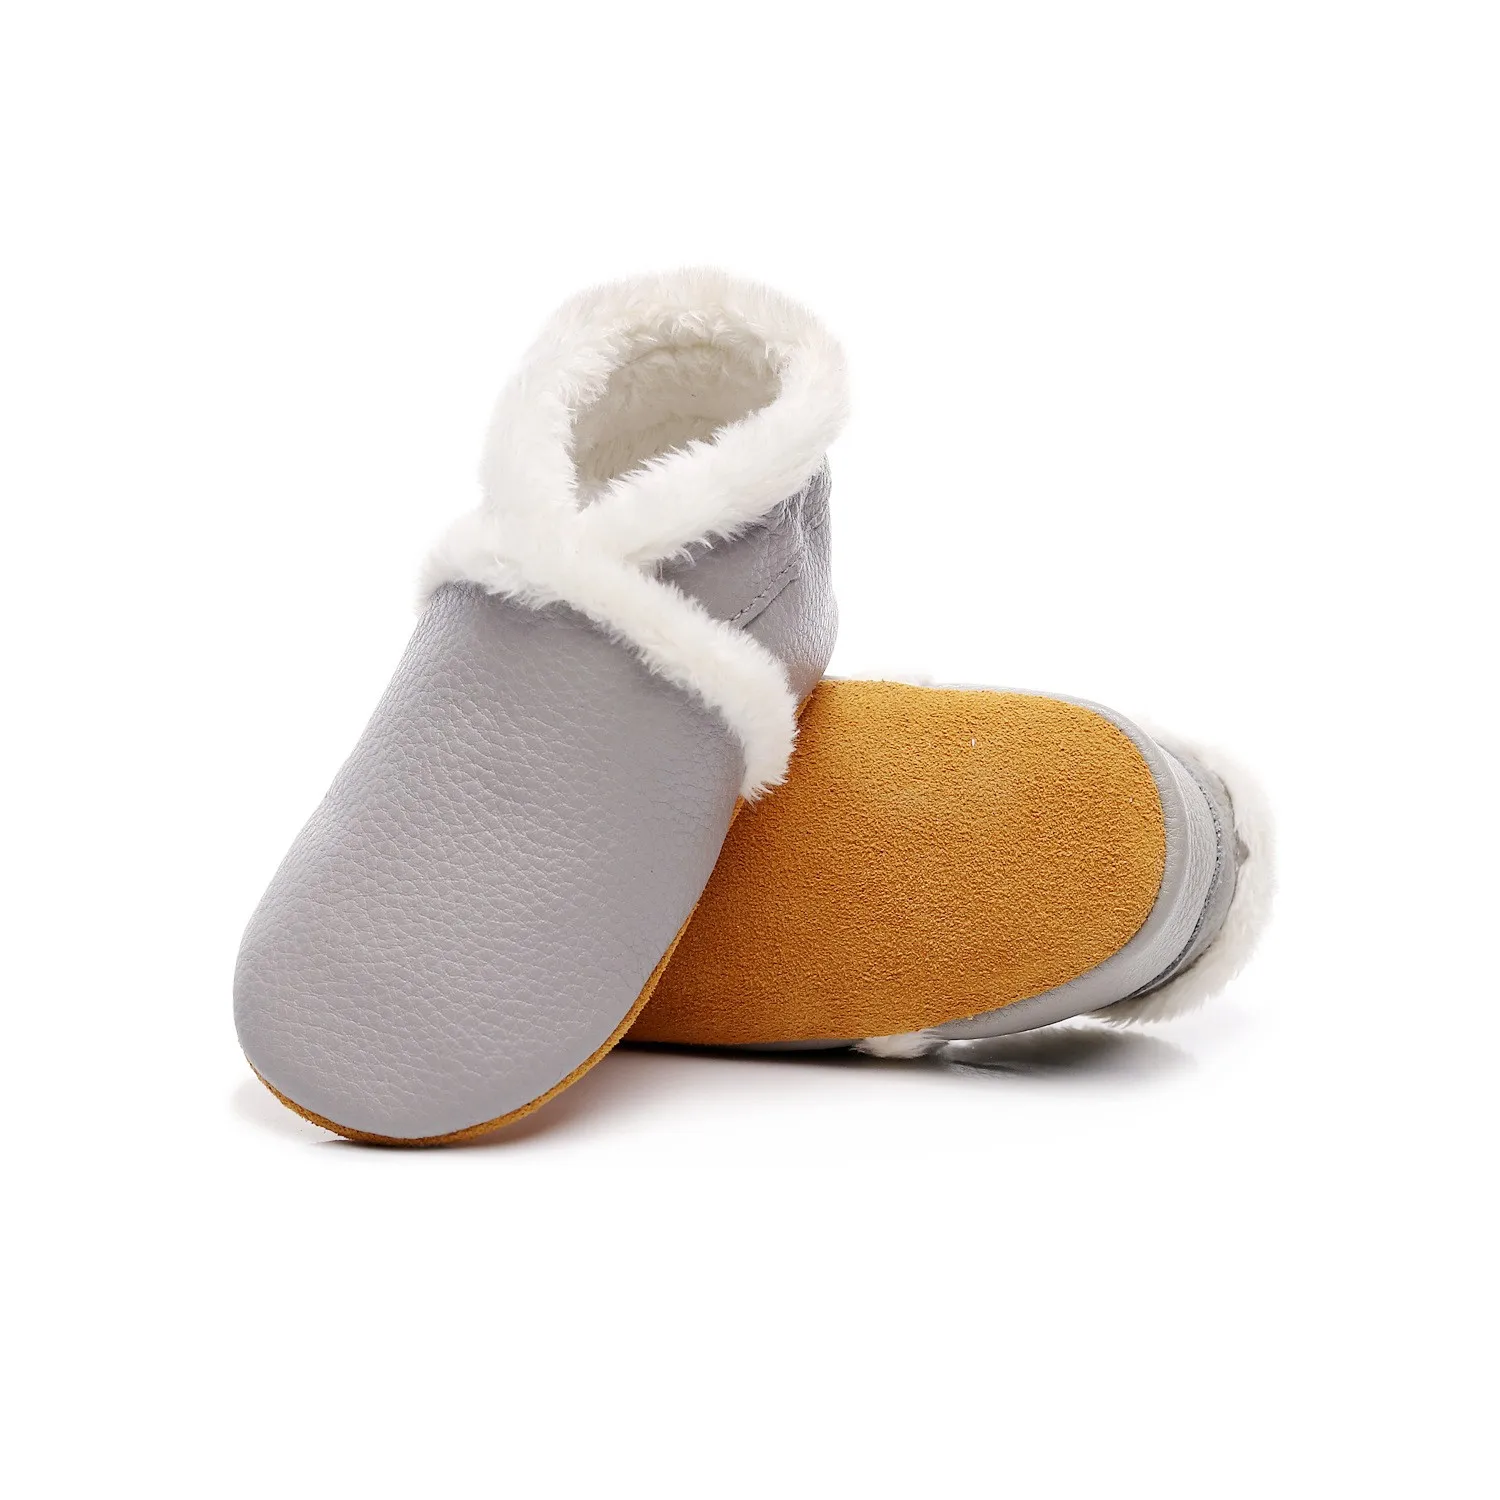 winter baby shoes 29